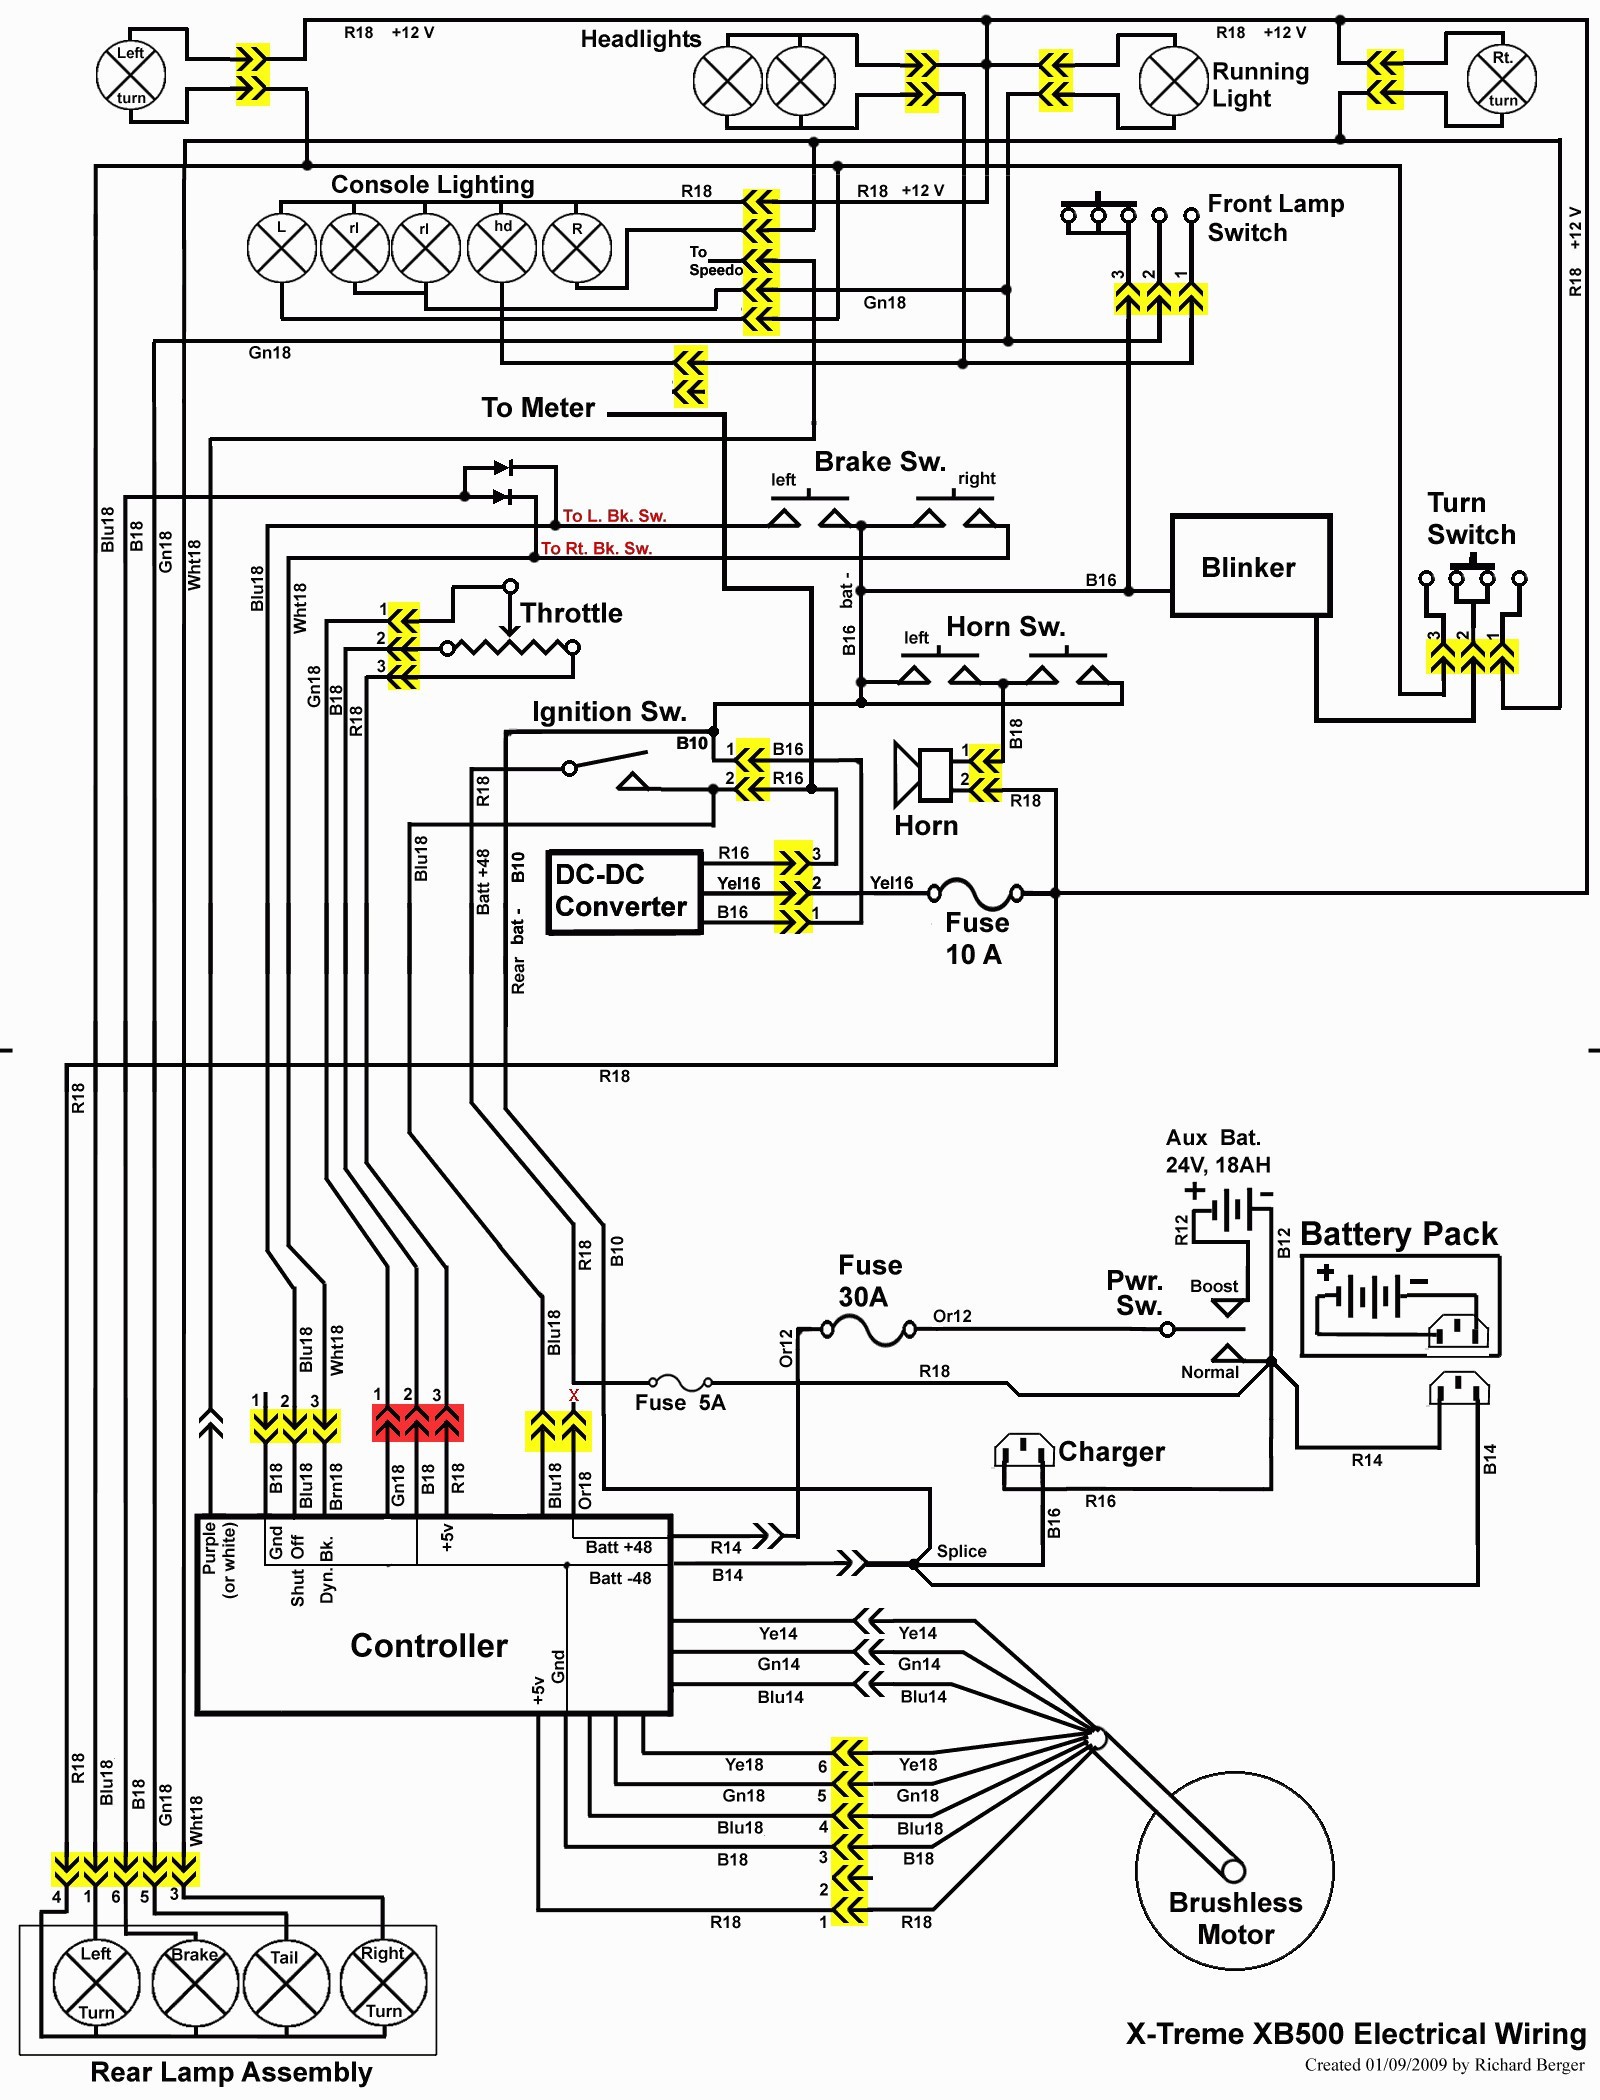 Wiring Diagram Electric Scooter New Baja Scooter 48 Volt Wiring Schematic Wire Center •